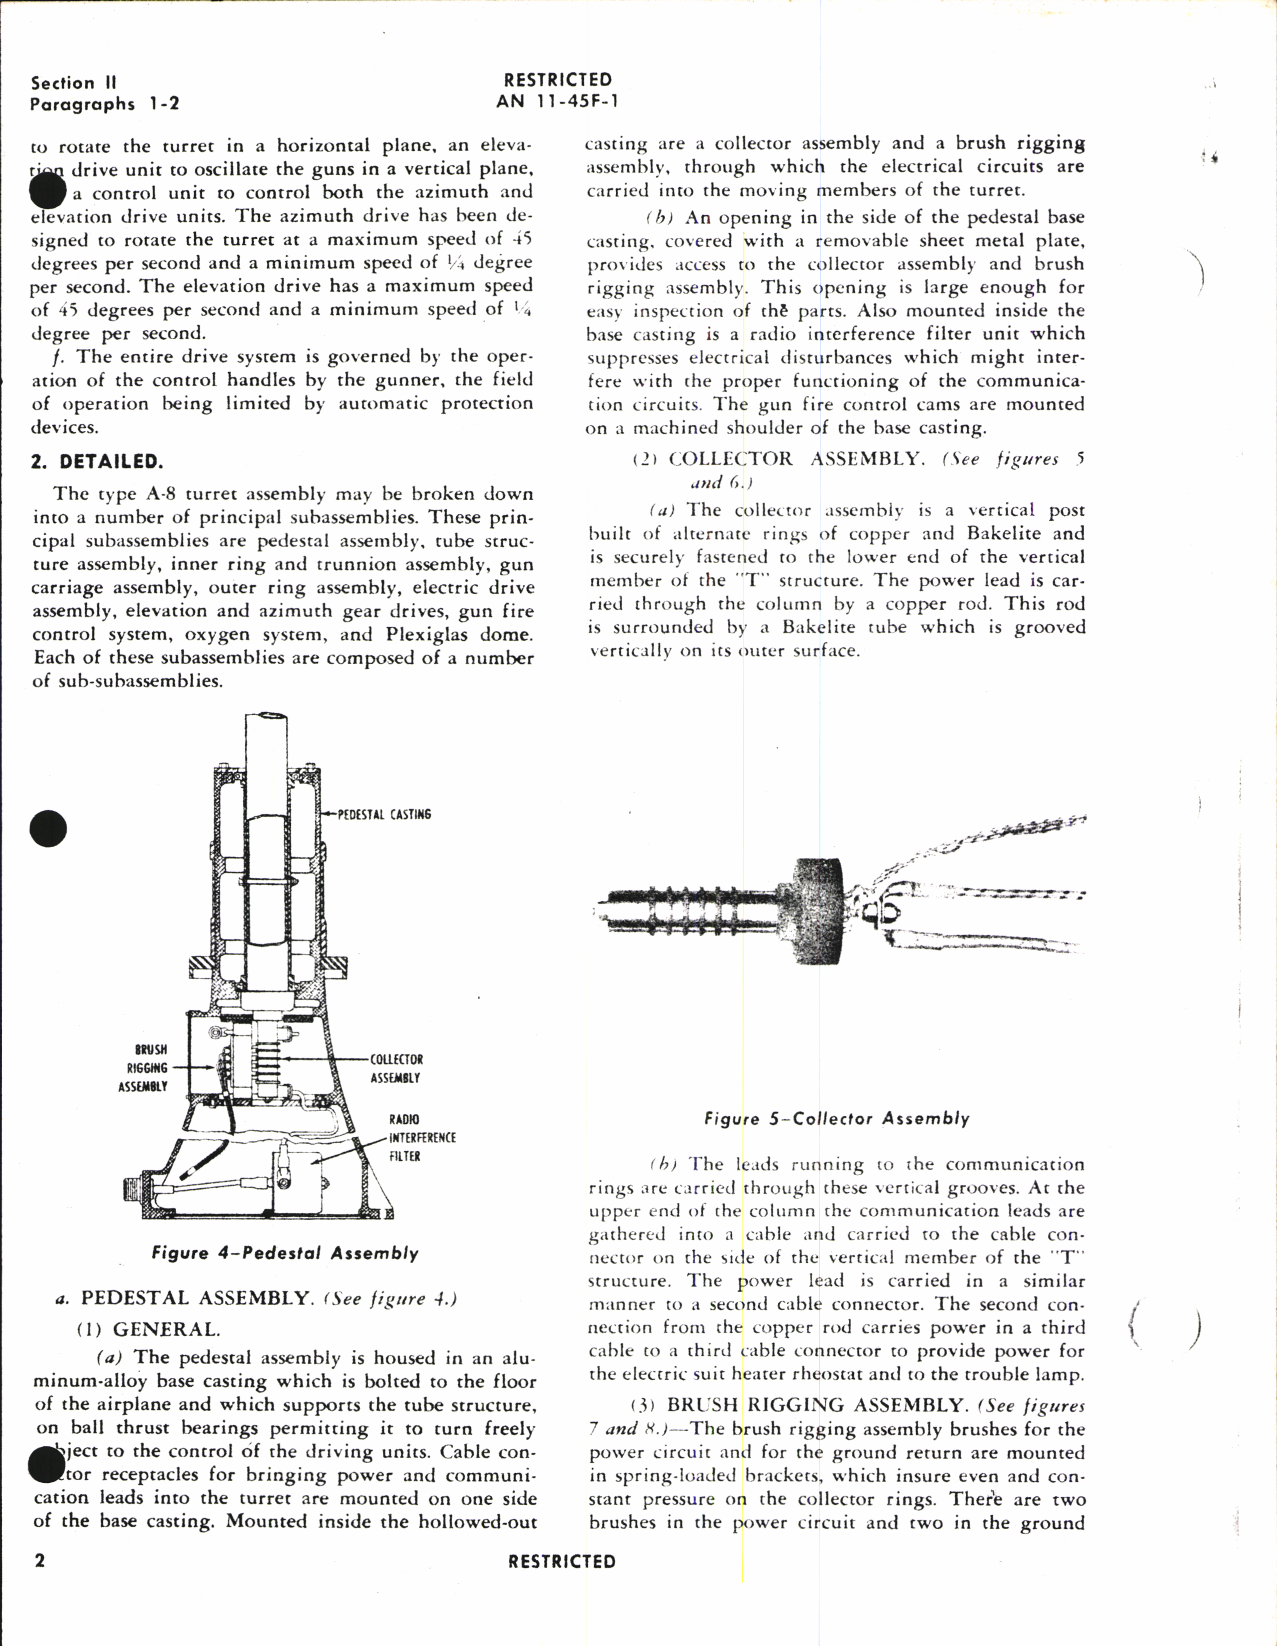 Sample page 6 from AirCorps Library document: Handbook of Instructions with Parts Catalog for Training Turret Type A-8